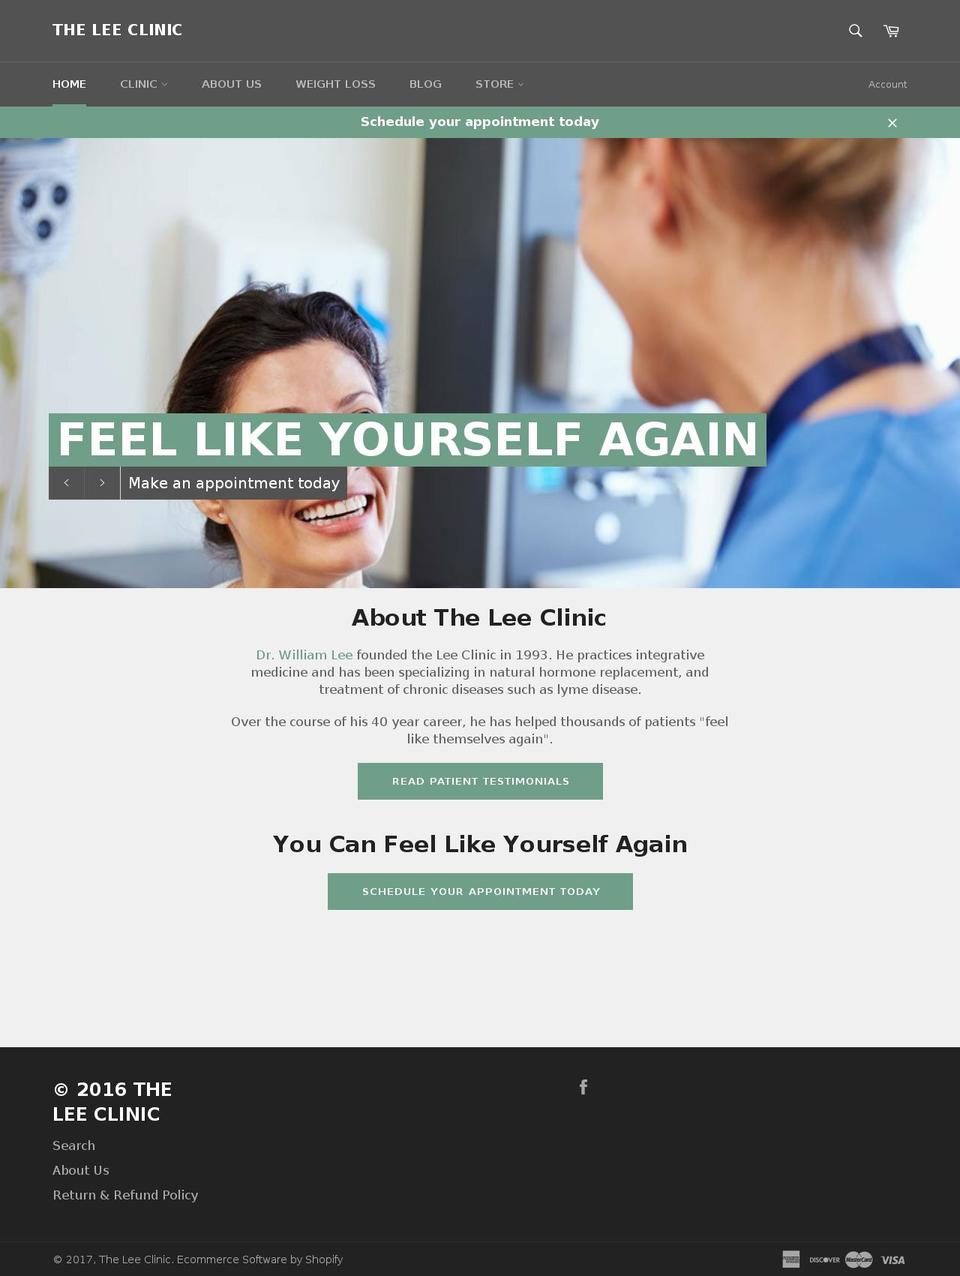 Envy Shopify theme site example theleeclinic.com